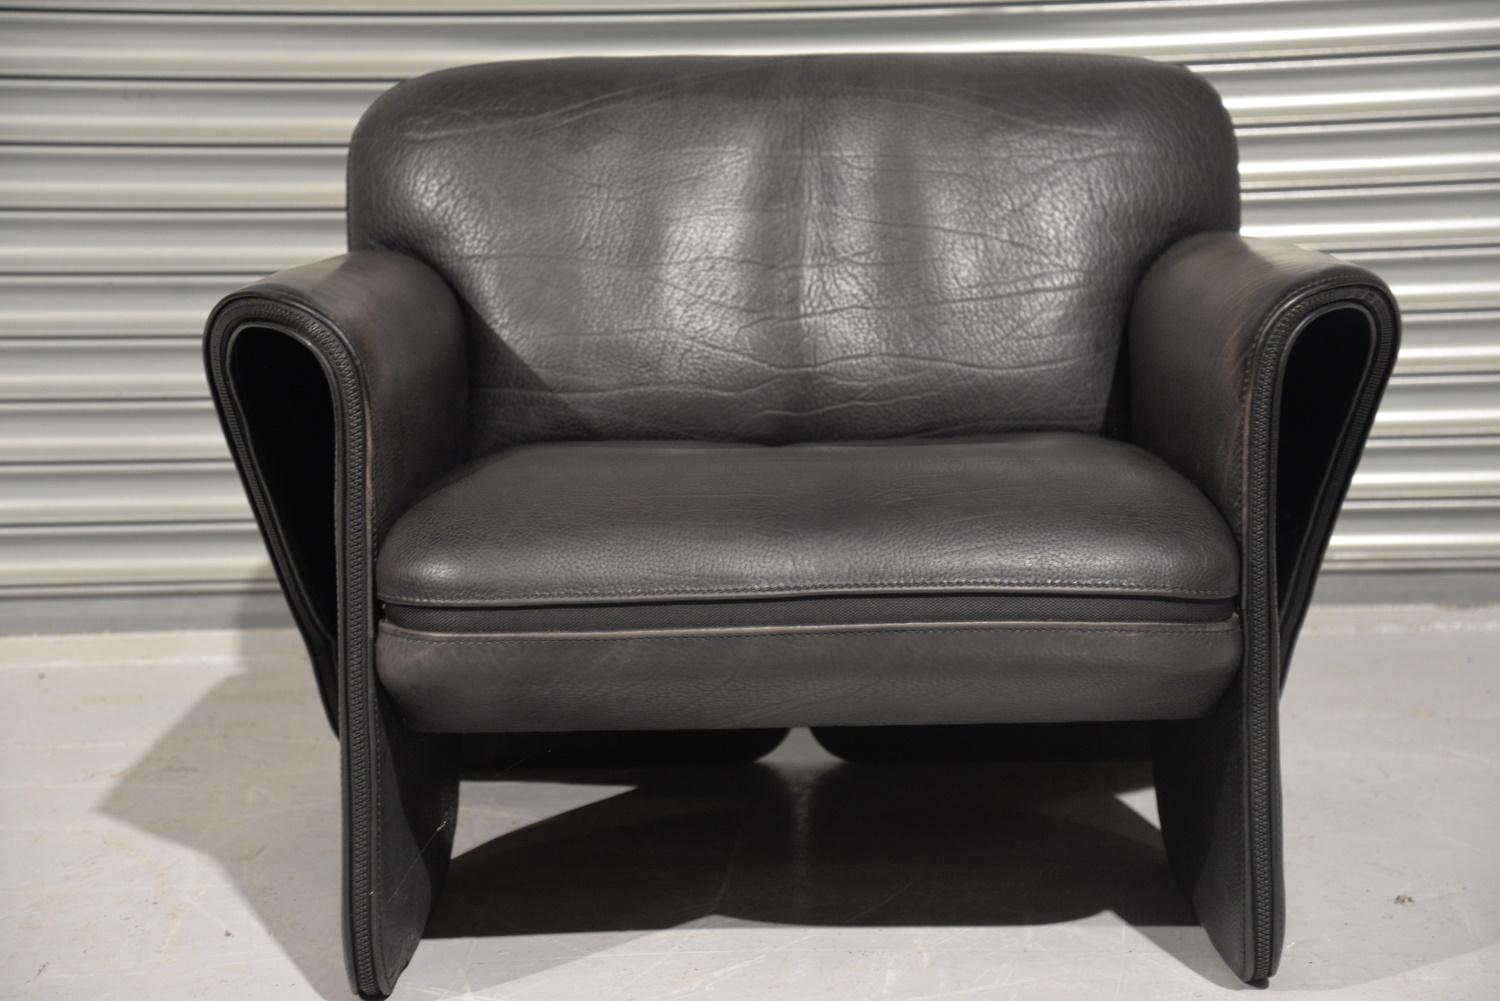 Ultra rare vintage De Sede DS 125 armchair by Gerd Lange in 1978. These sculptural pieces are upholstered in 3mm-5mm thick neck leather with a decorative zipper seam. This piece is in stunning black leather, extremely comfortable and presented in